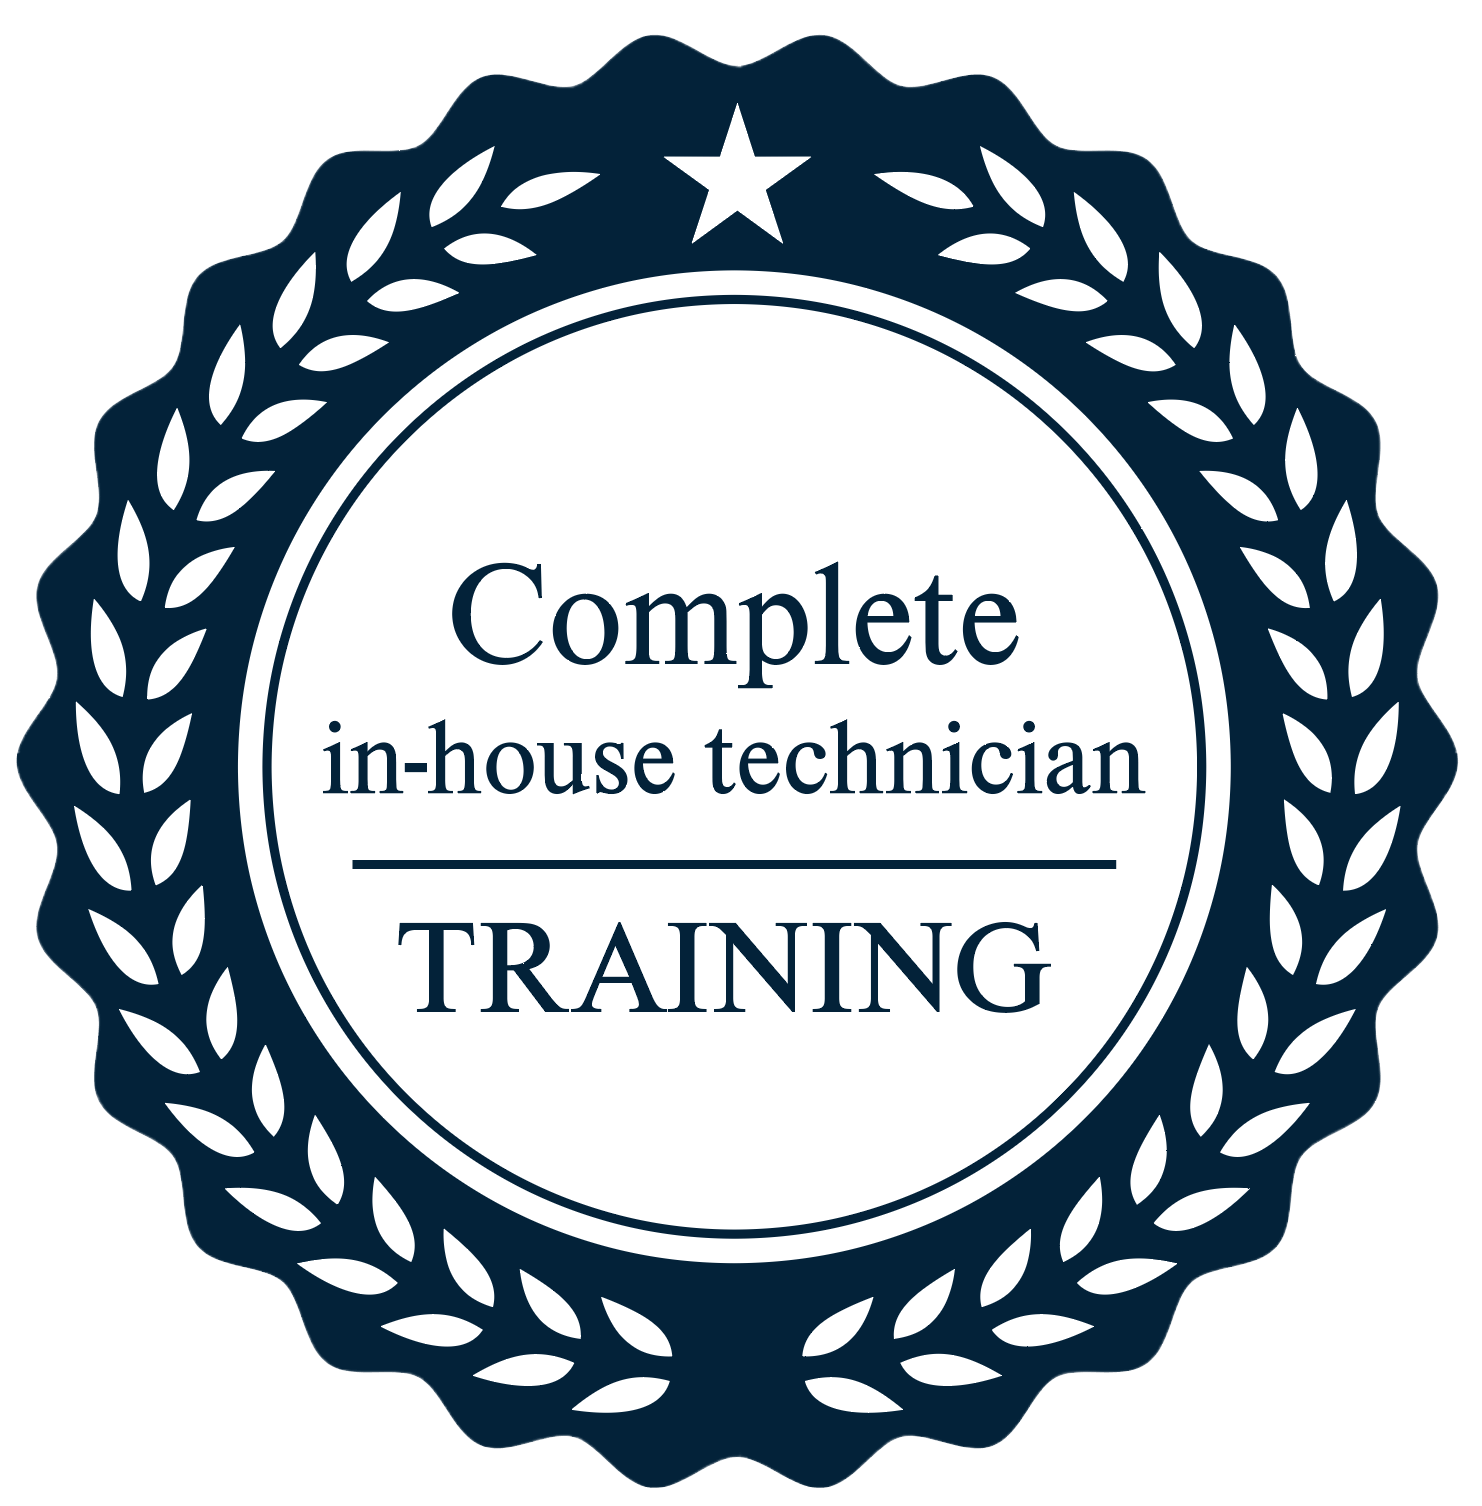 Complete in-house technician training icon